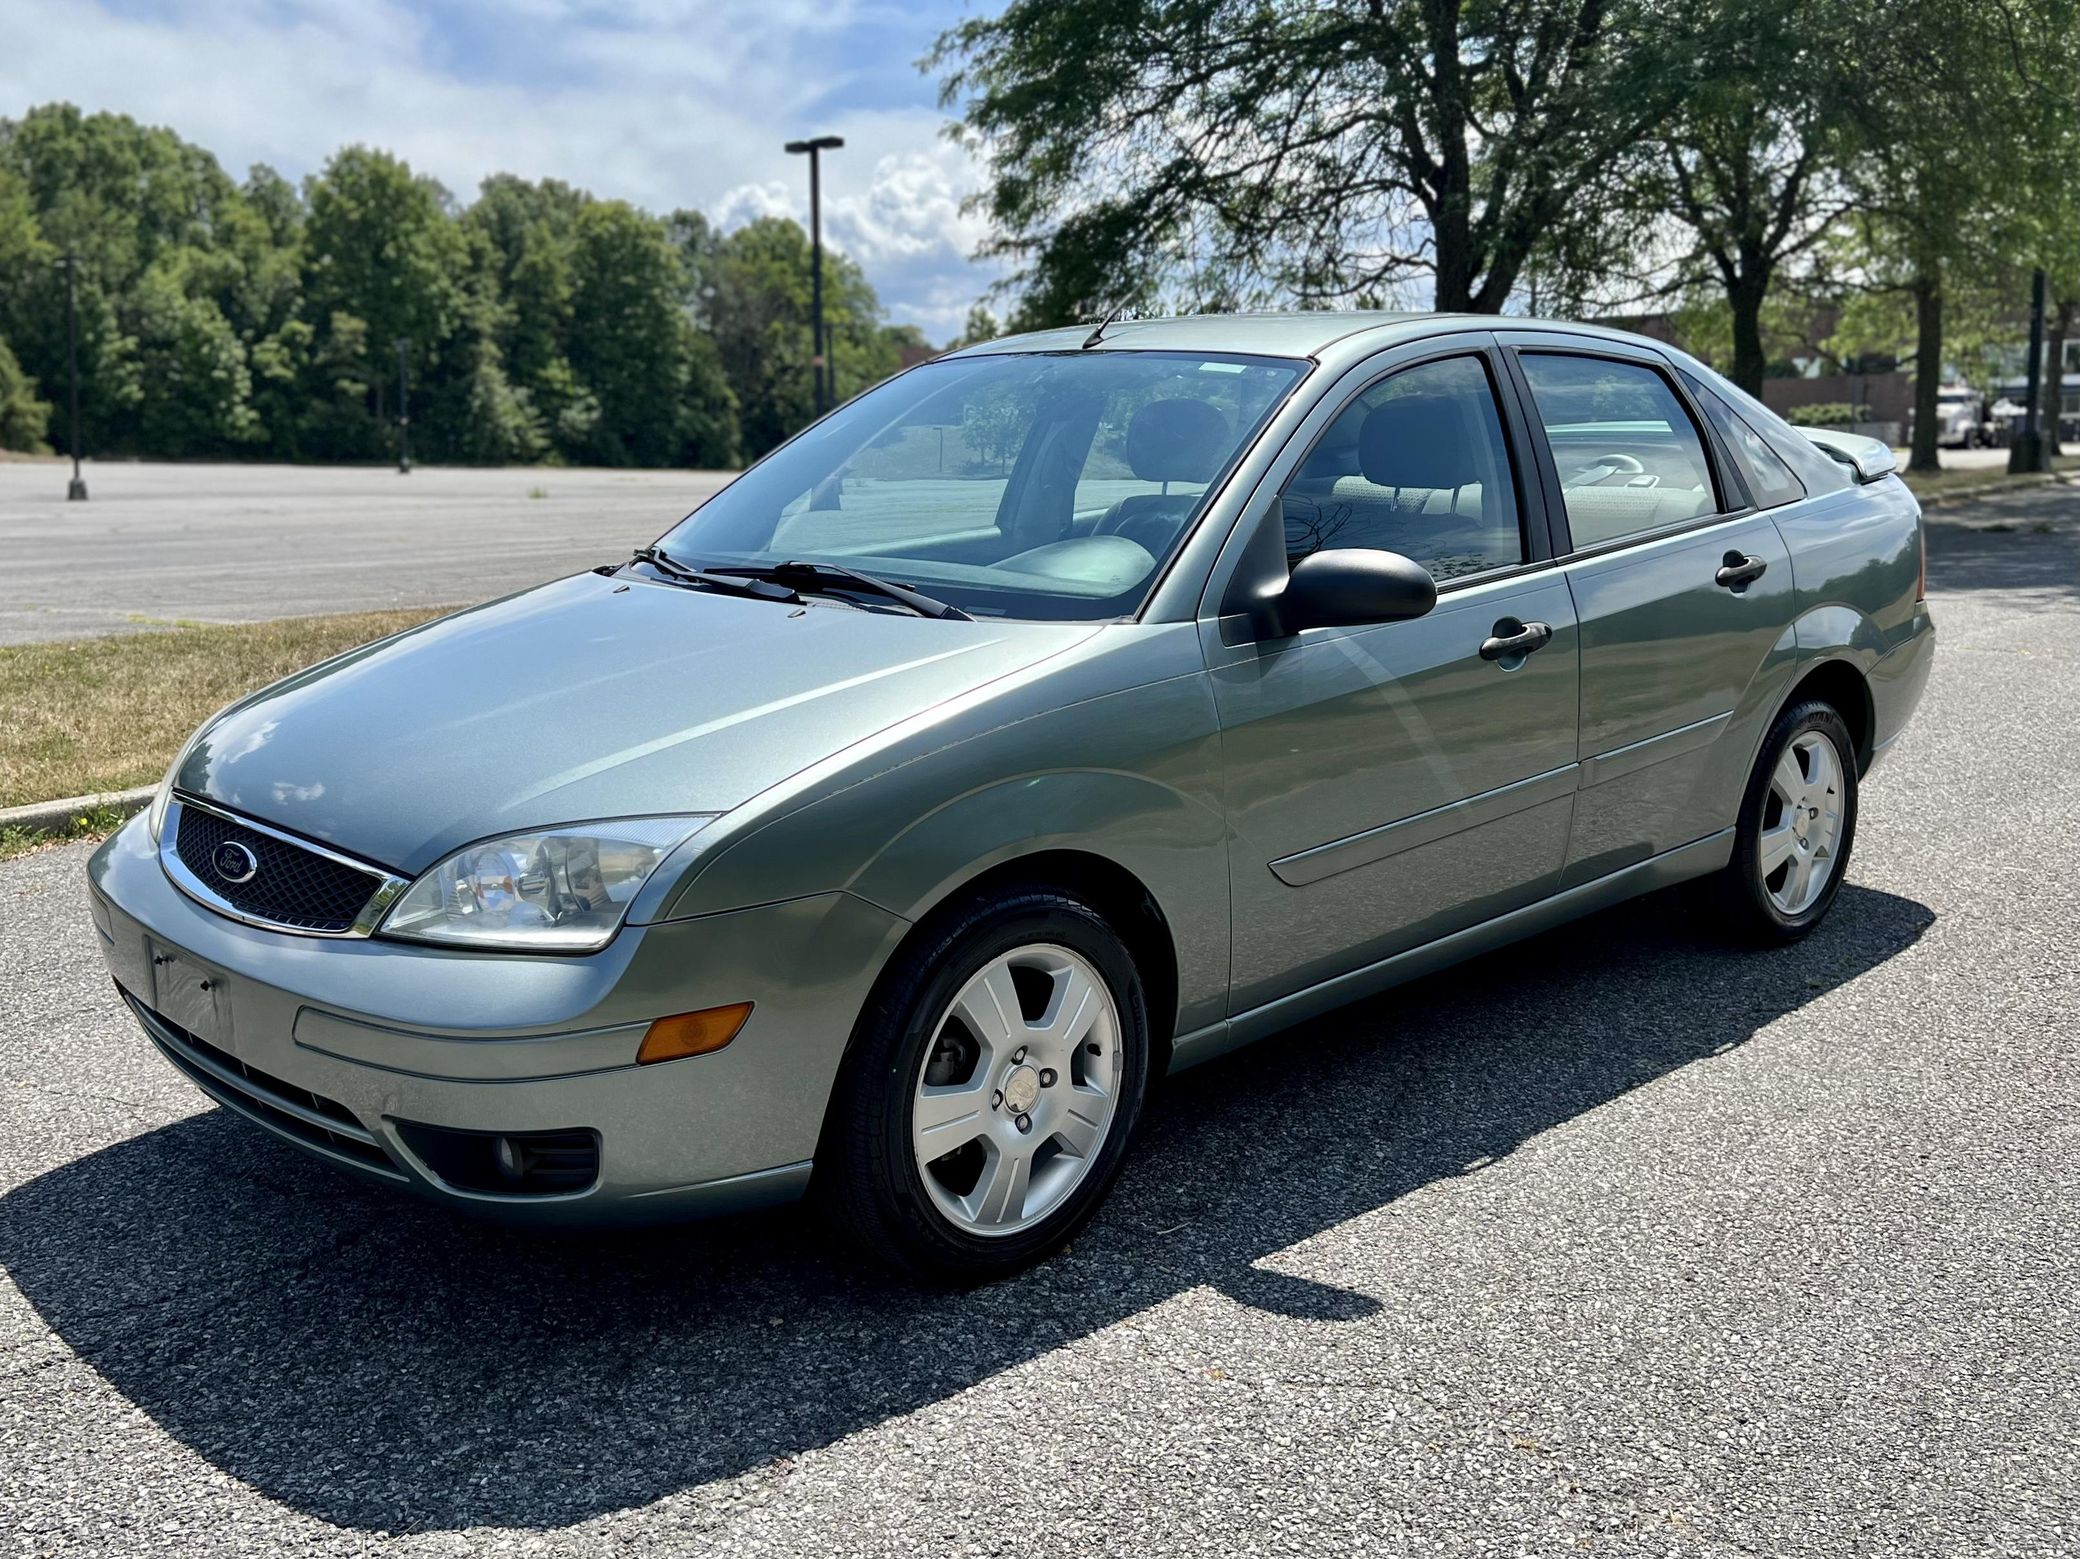 2006 Ford Focus SES With Just 11K Miles Up For Sale